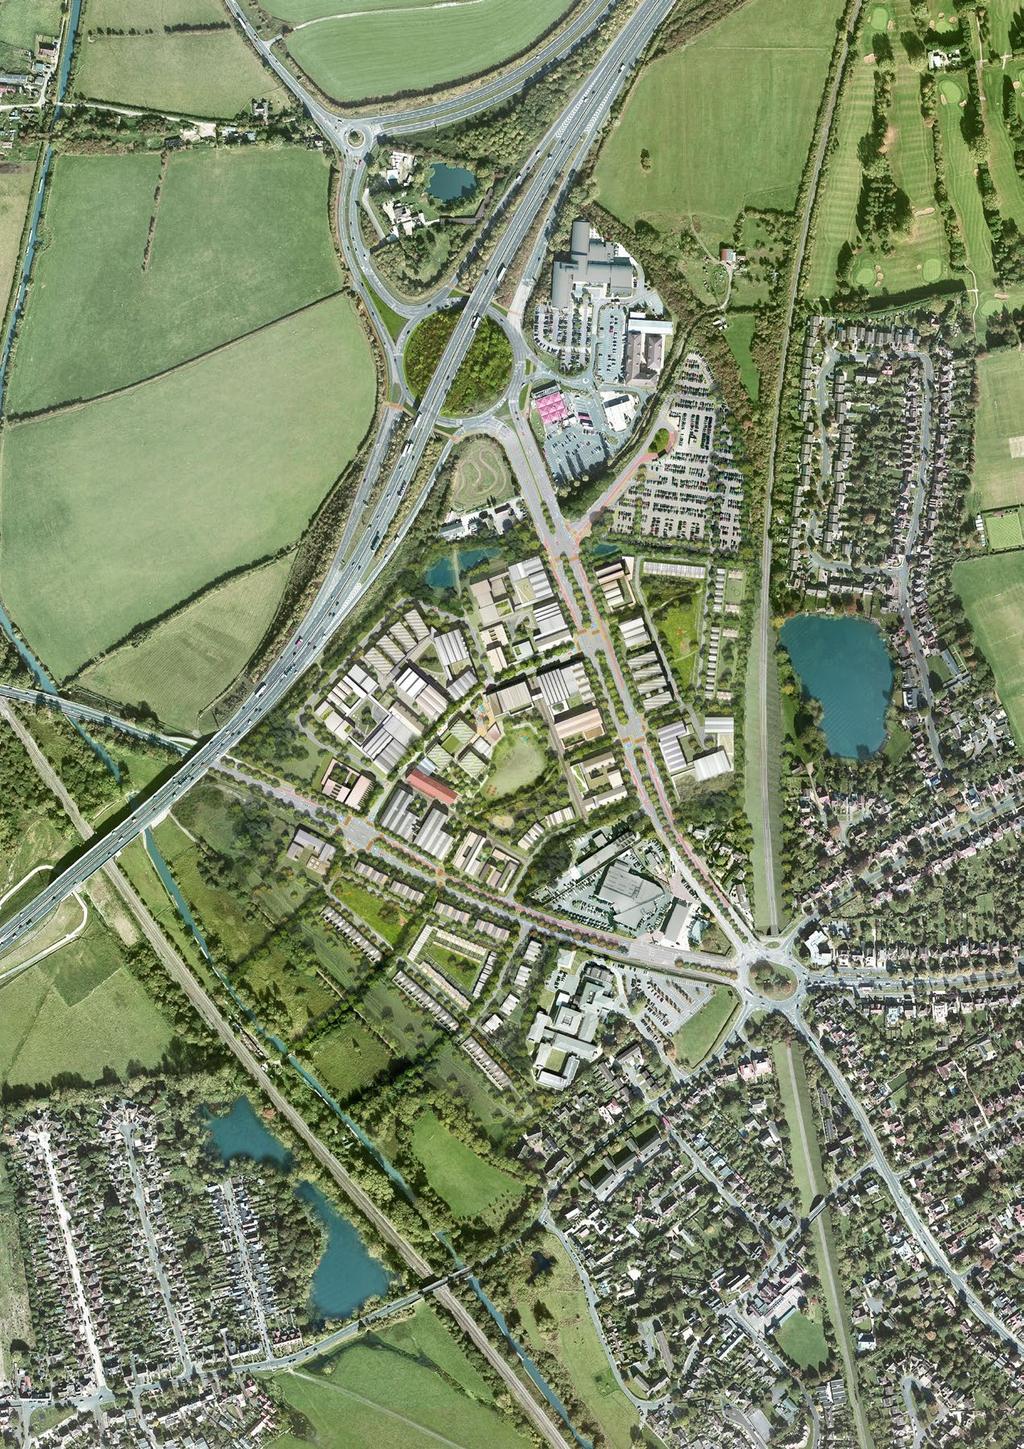 The Masterplan will see a clearly defined set of open spaces with three land areas linking together with bespoke